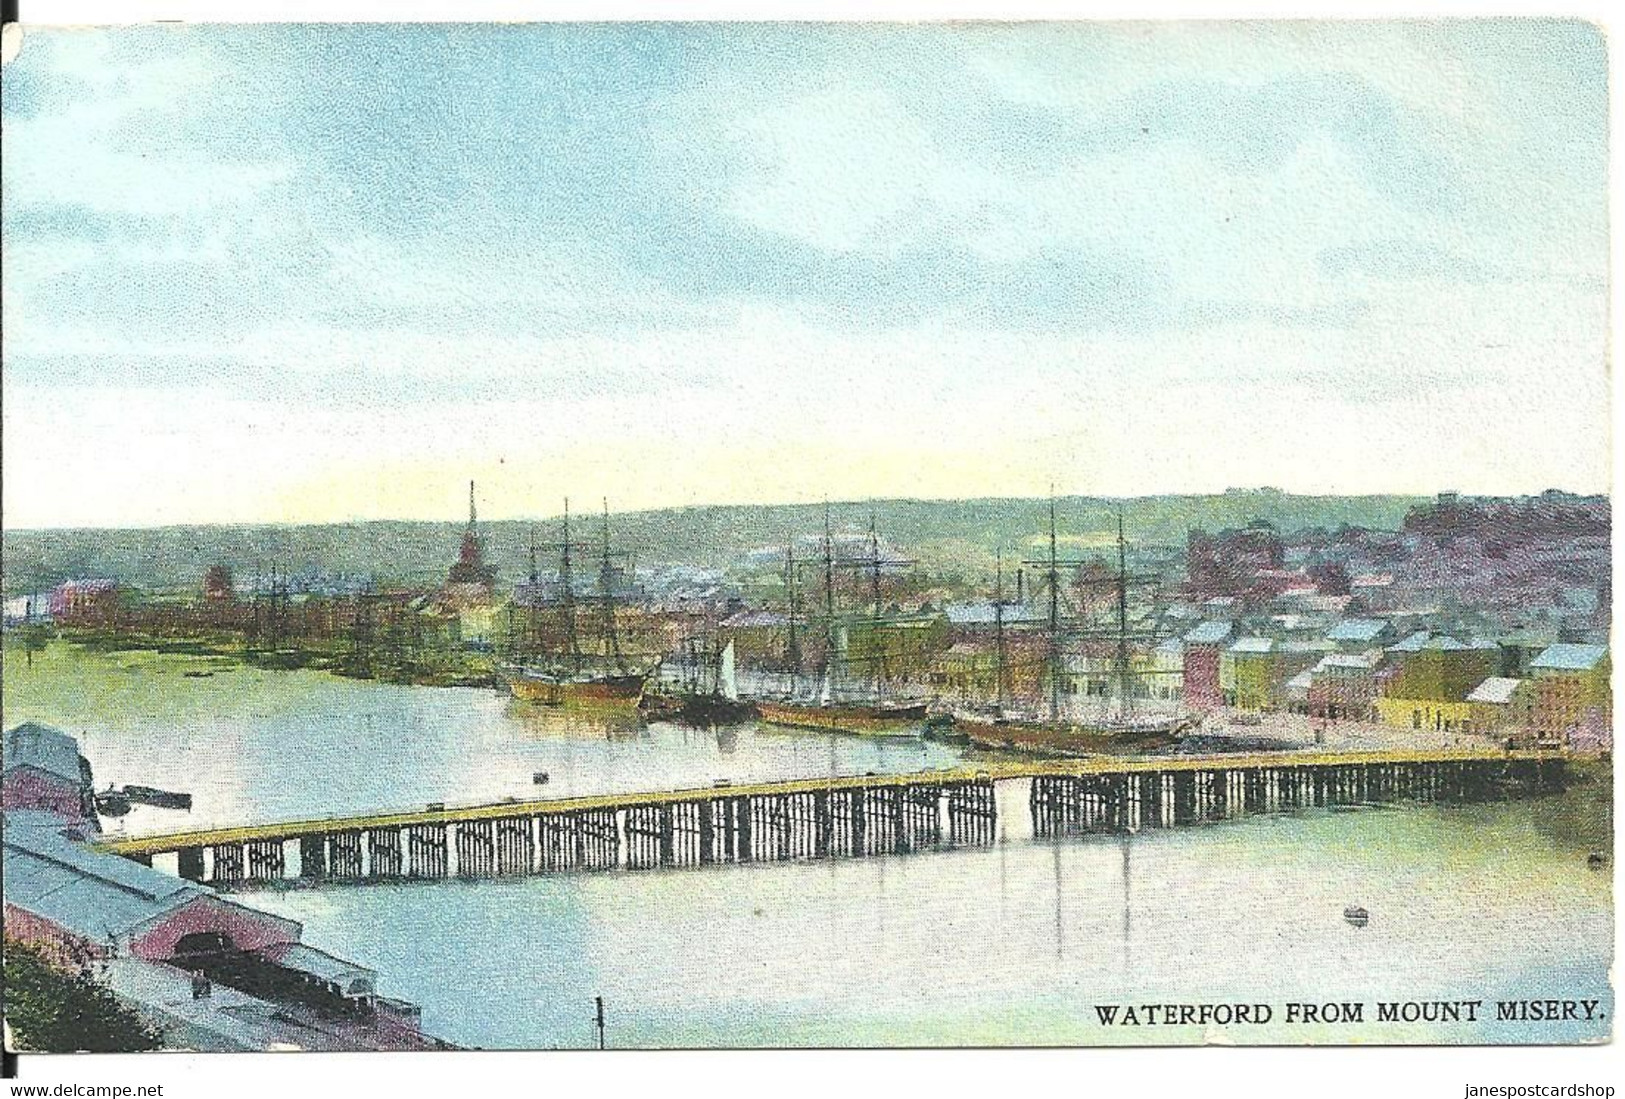 WATERFORD FROM MOUNT MISERY - SHIPS - BRIDGE - GOOD LONDONDERRY POSTPARK - 1907 - LOCAL PUBLISHER - Waterford